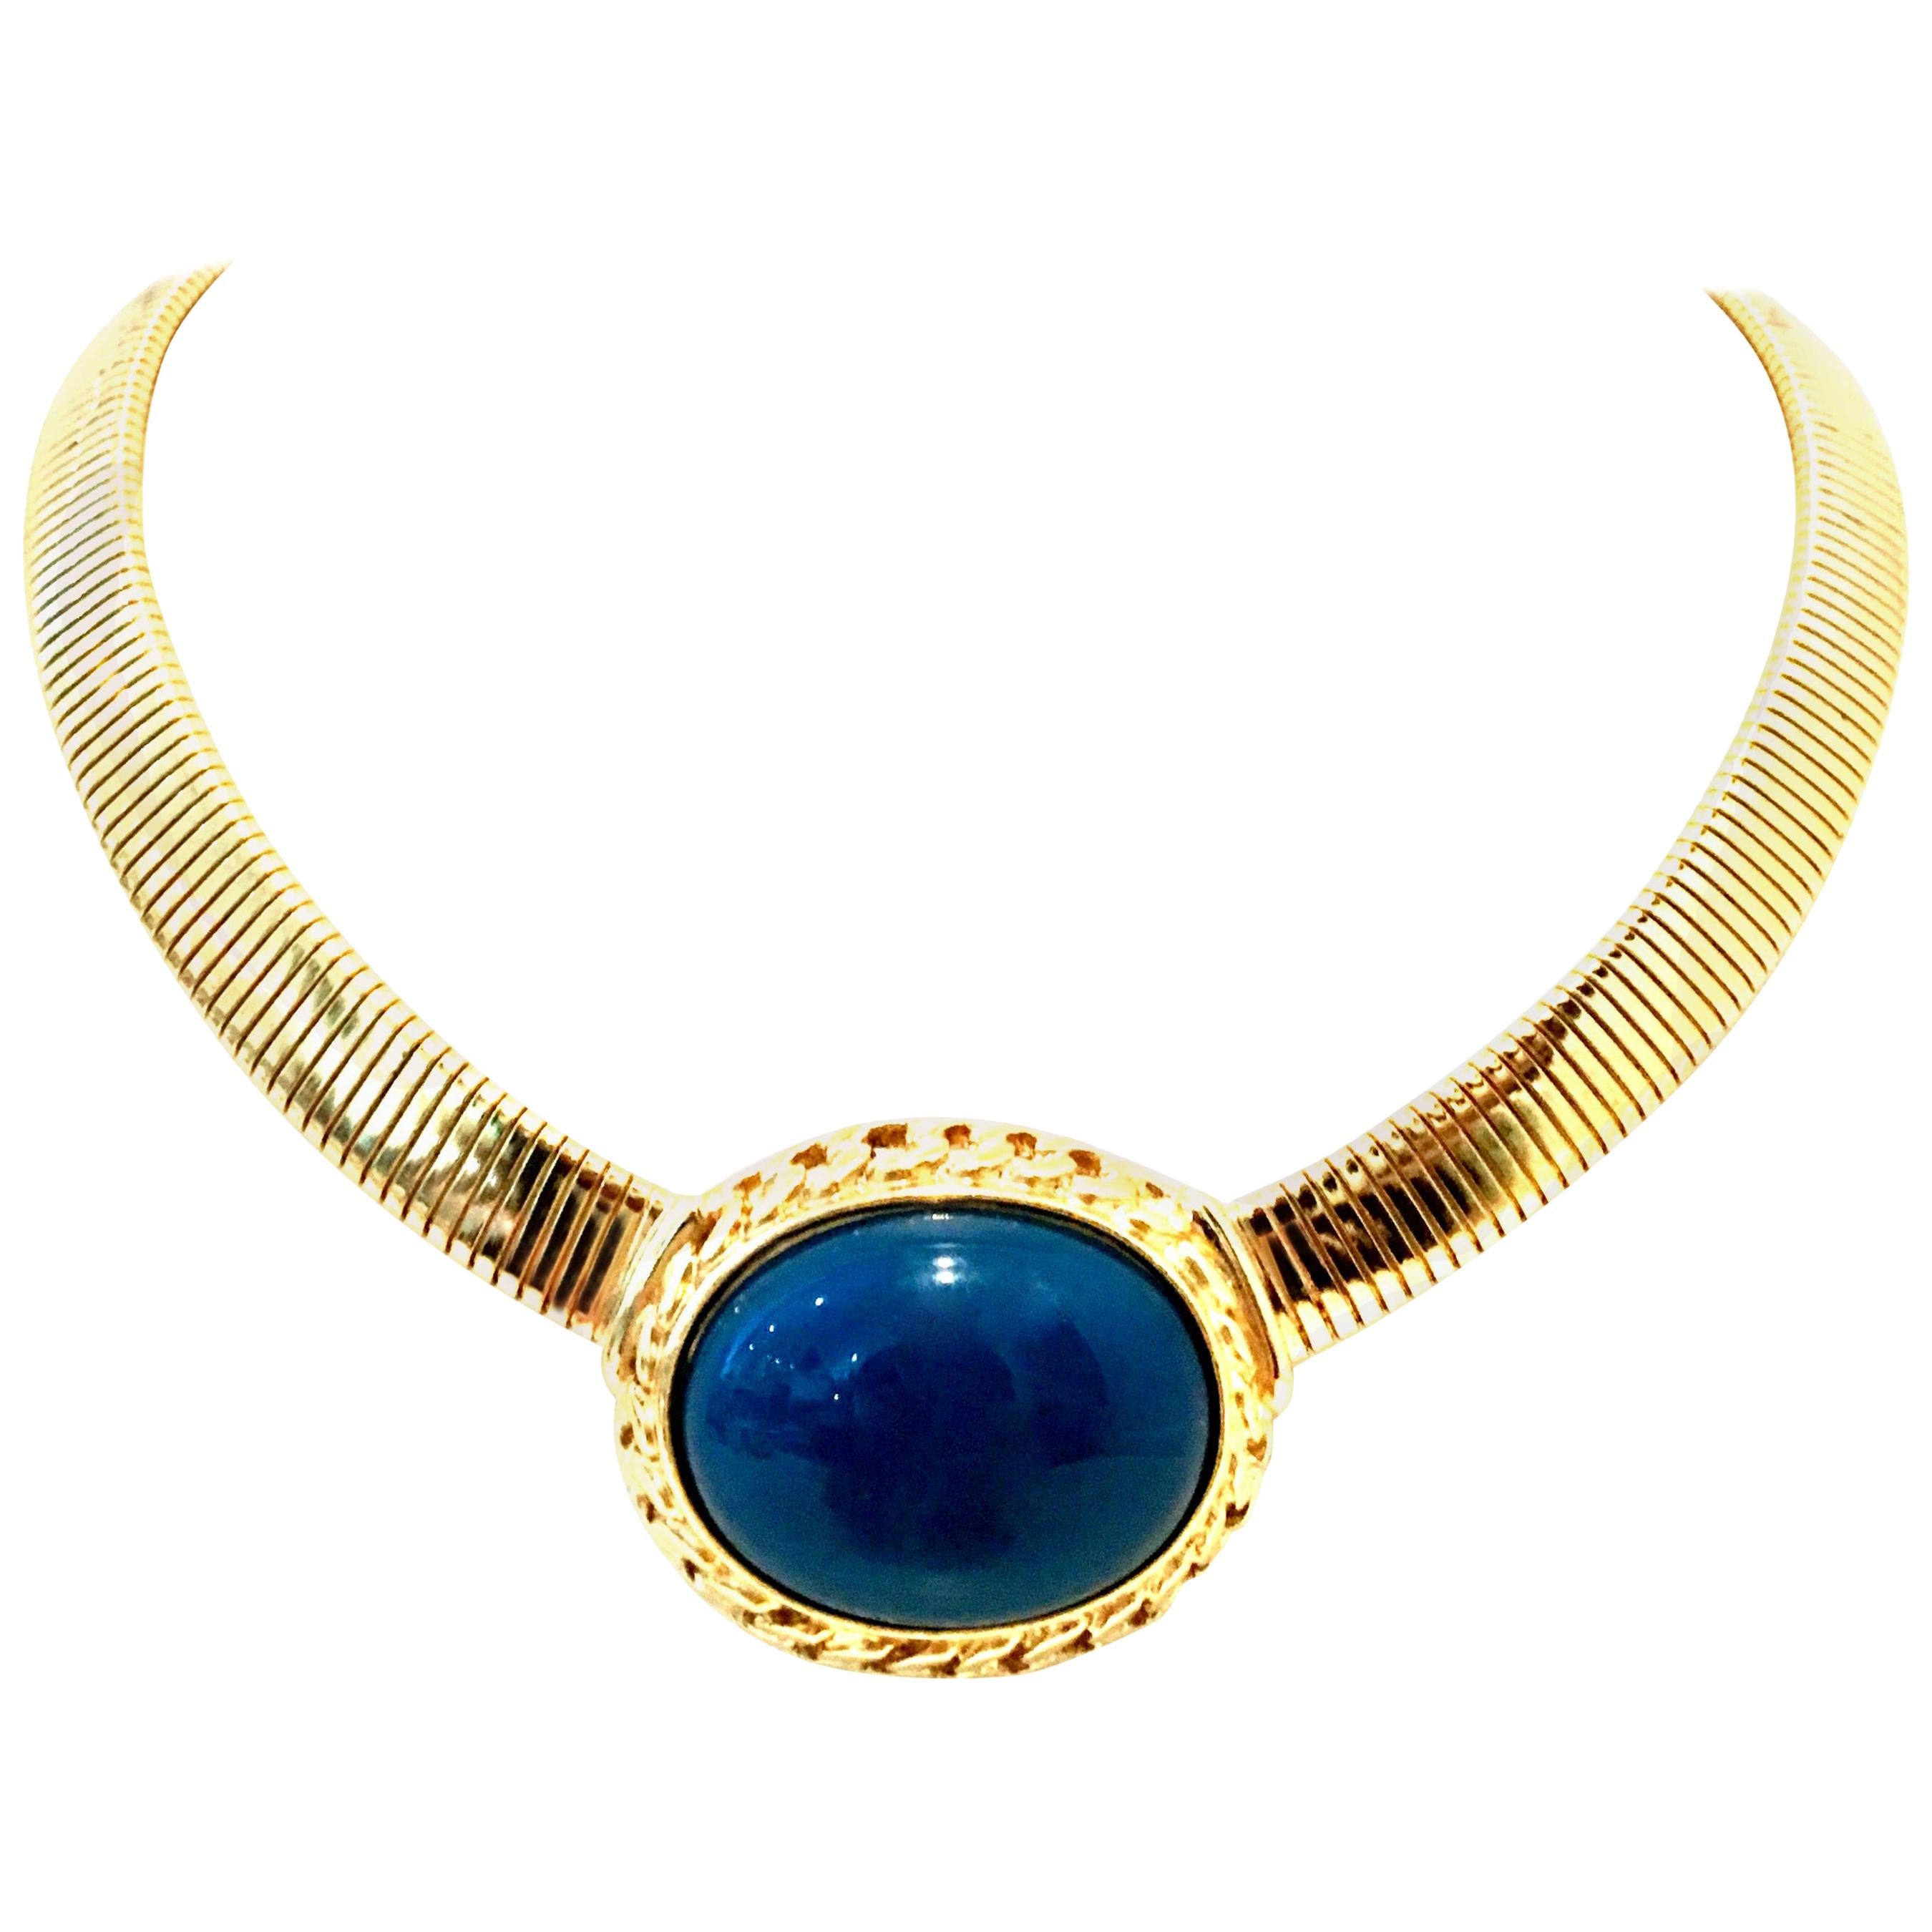 20th Century Gold Plate & Faux Blue Lapis Omega Choker Necklace By, Trifari